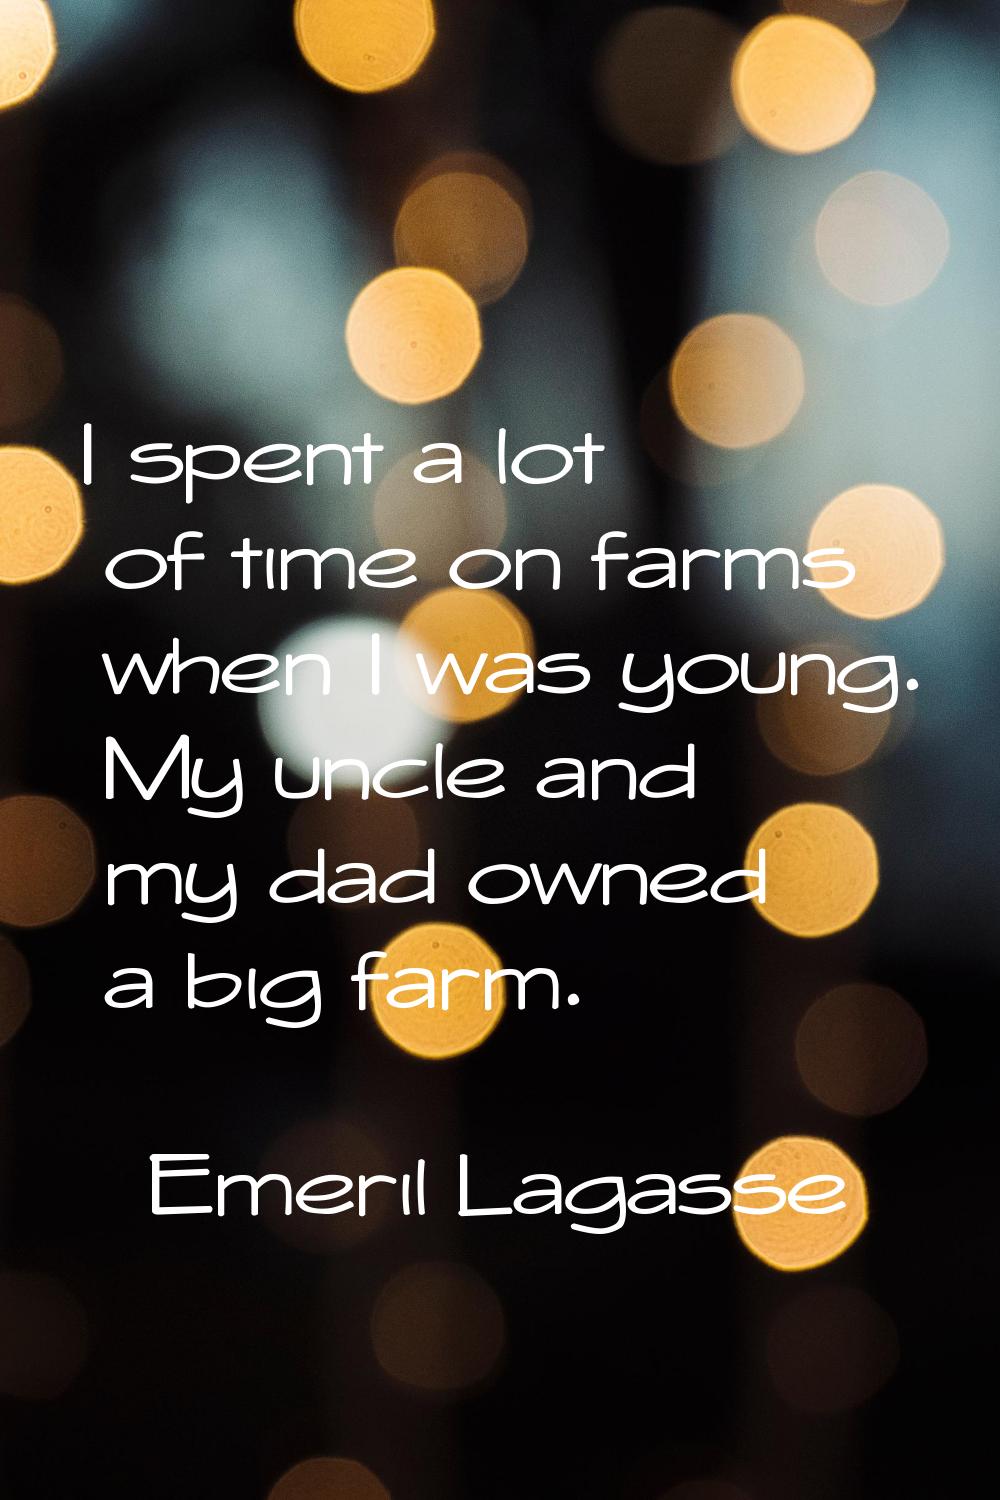 I spent a lot of time on farms when I was young. My uncle and my dad owned a big farm.